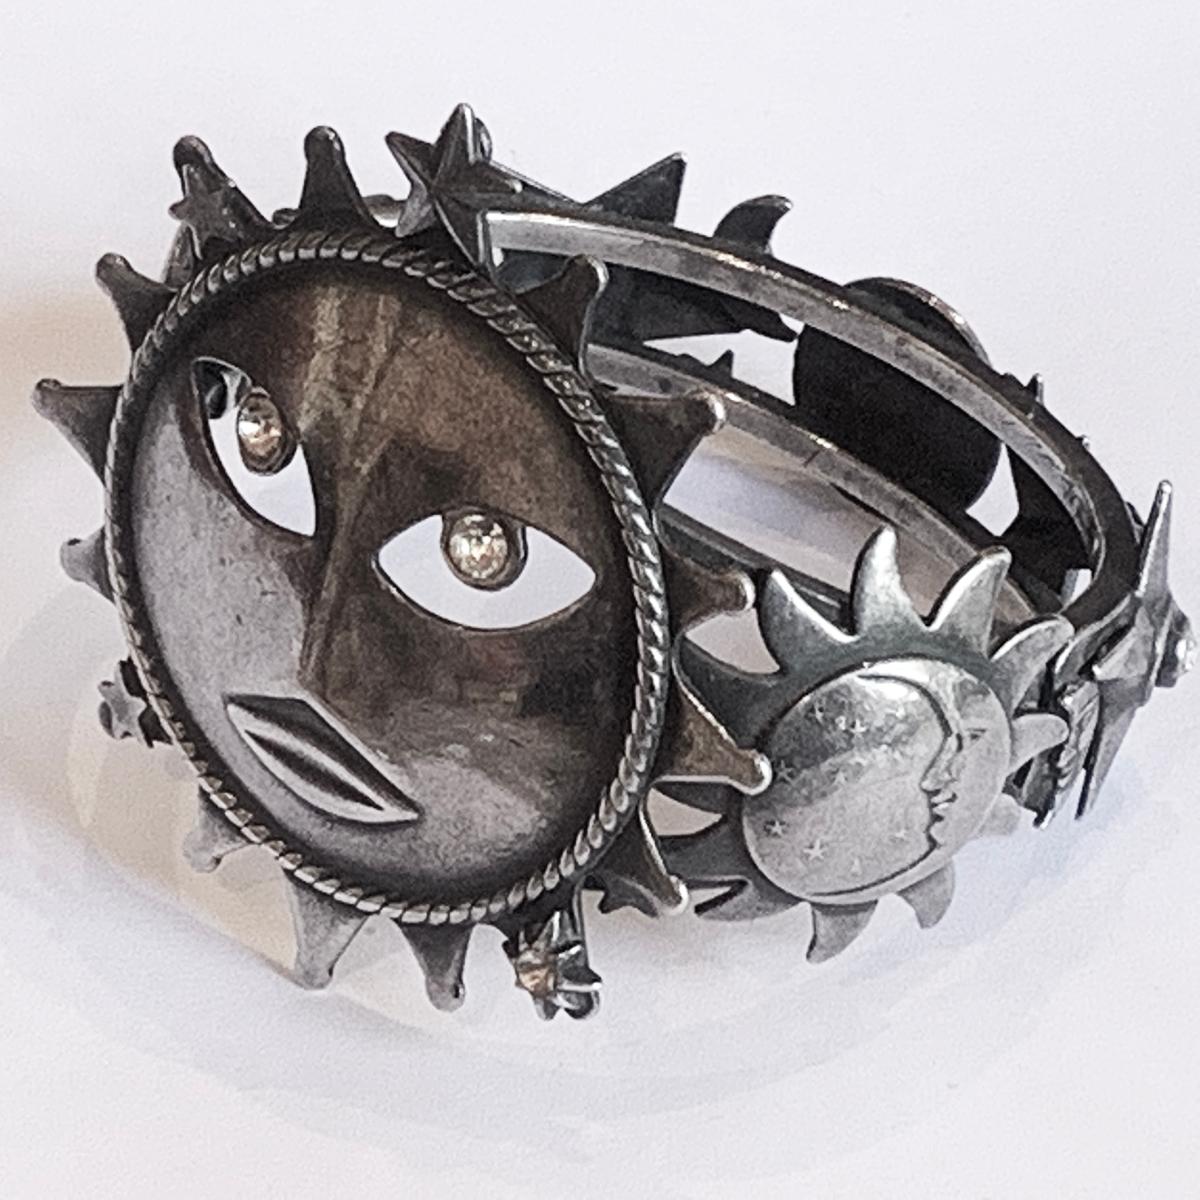 An Askew of London Clamper Bangle, depicting the Full Moon with diamante eyes all in Silver finish. The sides have New Moon phases, all with faces and , and Stars, all in different sizes and decorated with diamantes. The bangle is typical Art Deco